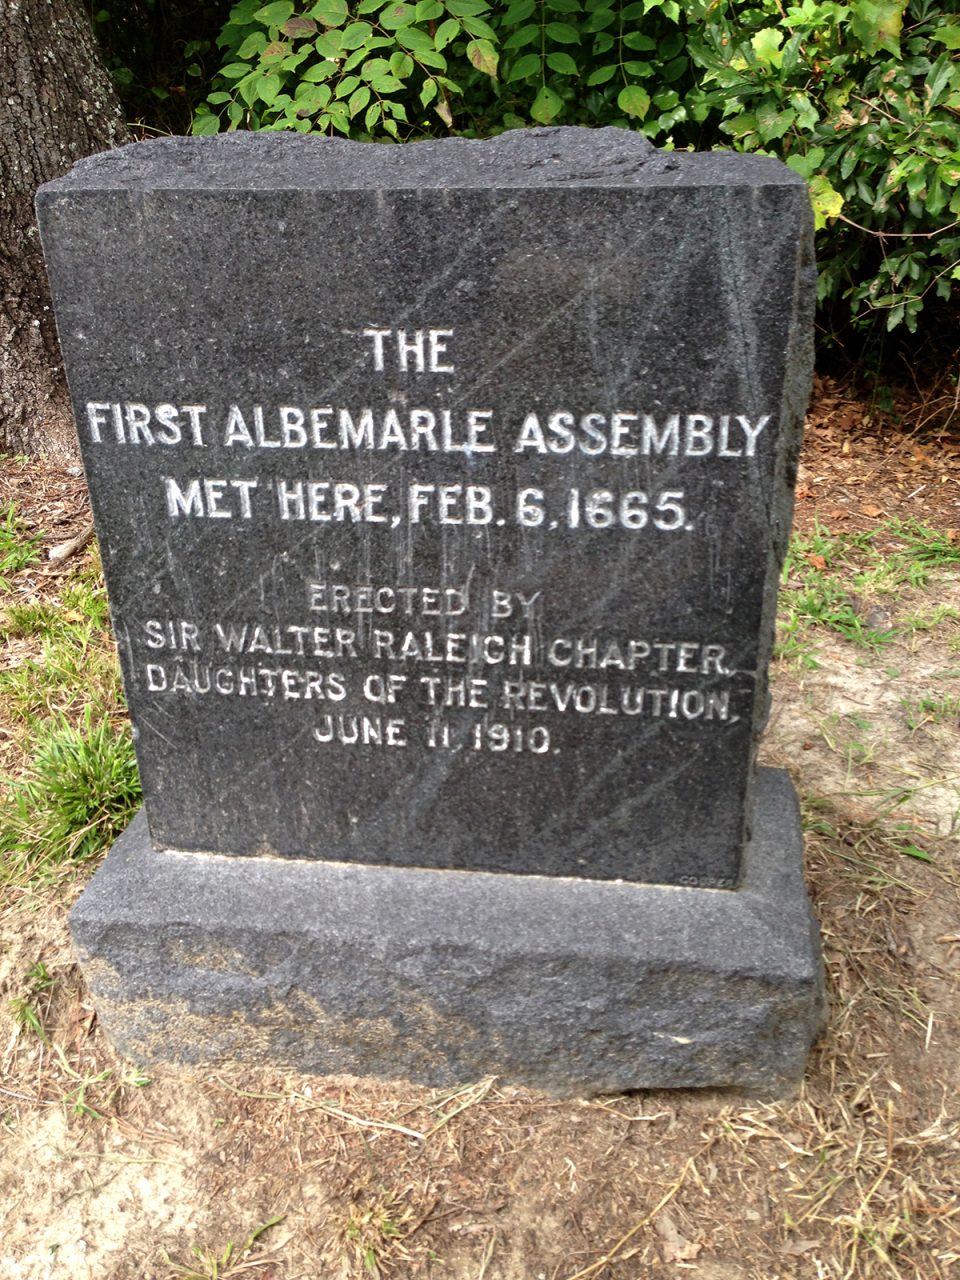 A marker notes the site of the Albemarle Assembly's first meeting. Photo: Eric Medlin